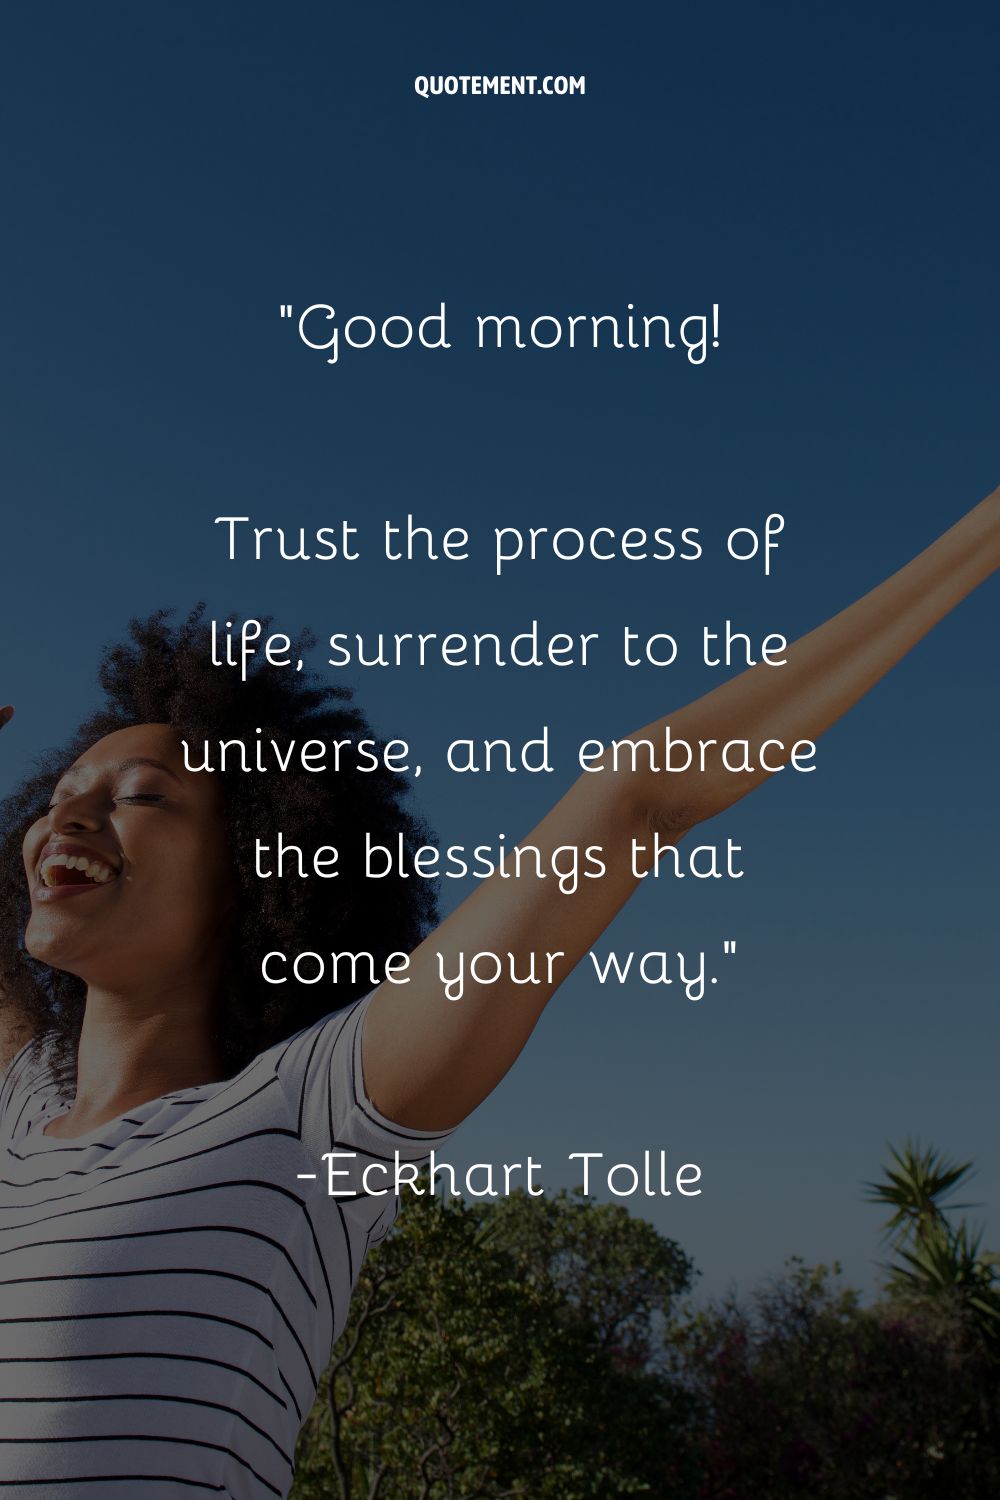 Good morning! Trust the process of life, surrender to the universe, and embrace the blessings that come your way